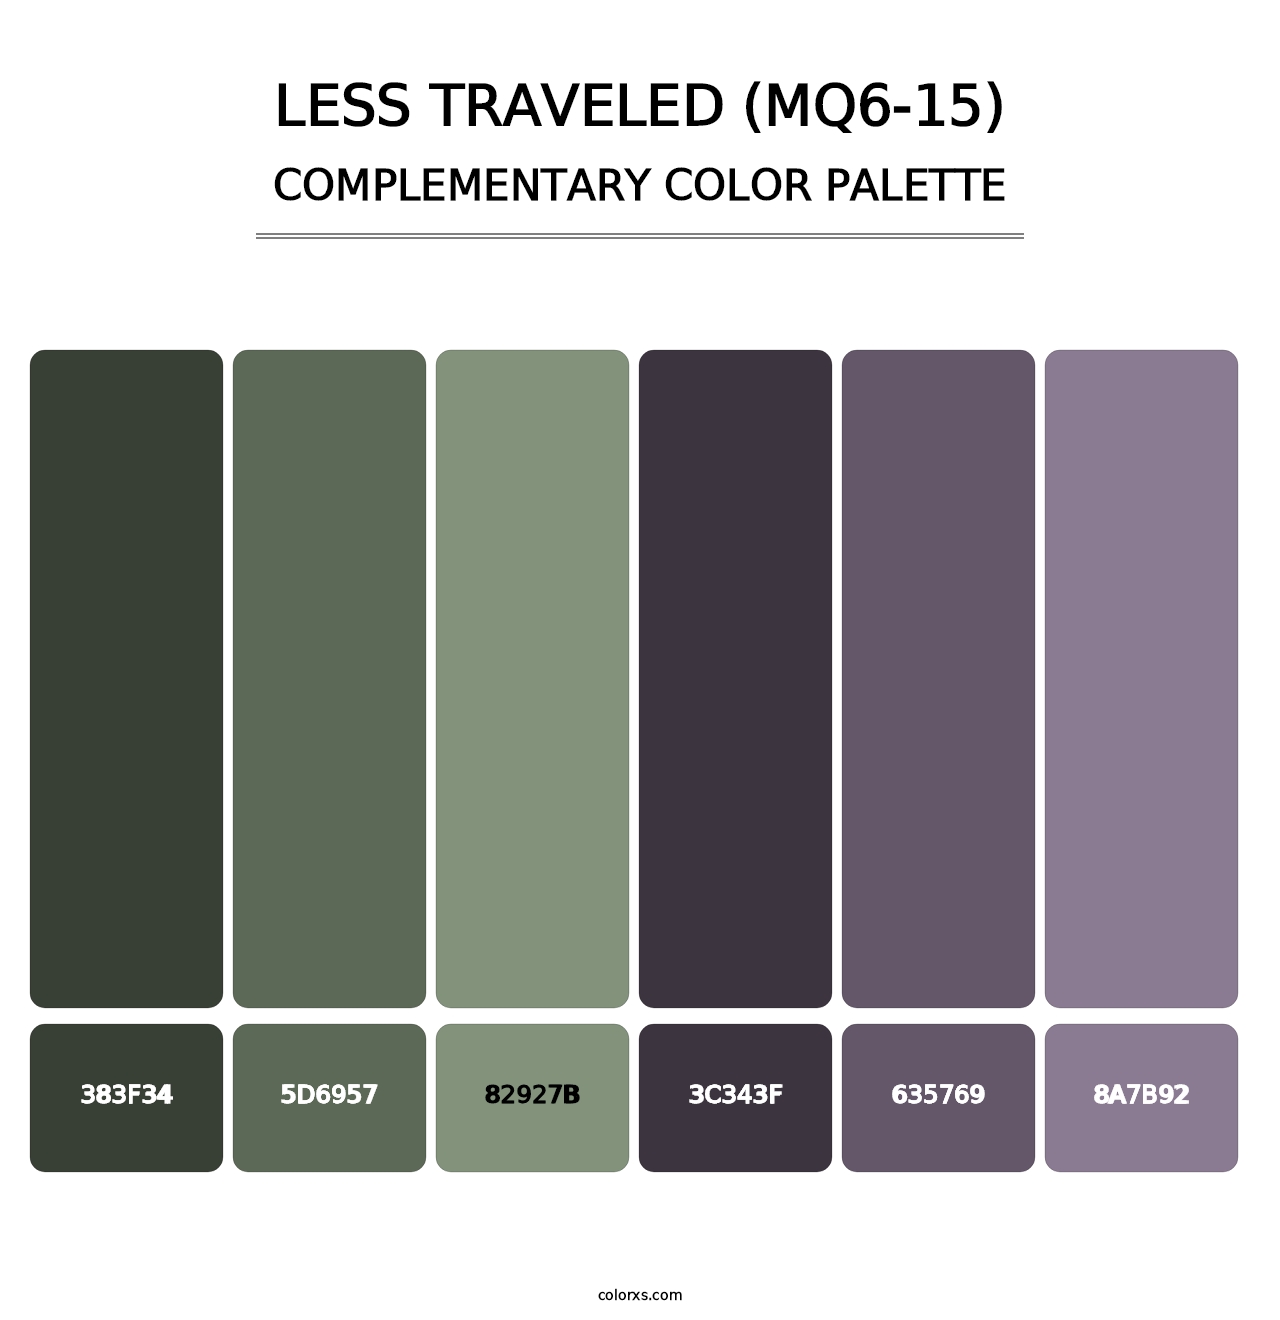 Less Traveled (MQ6-15) - Complementary Color Palette